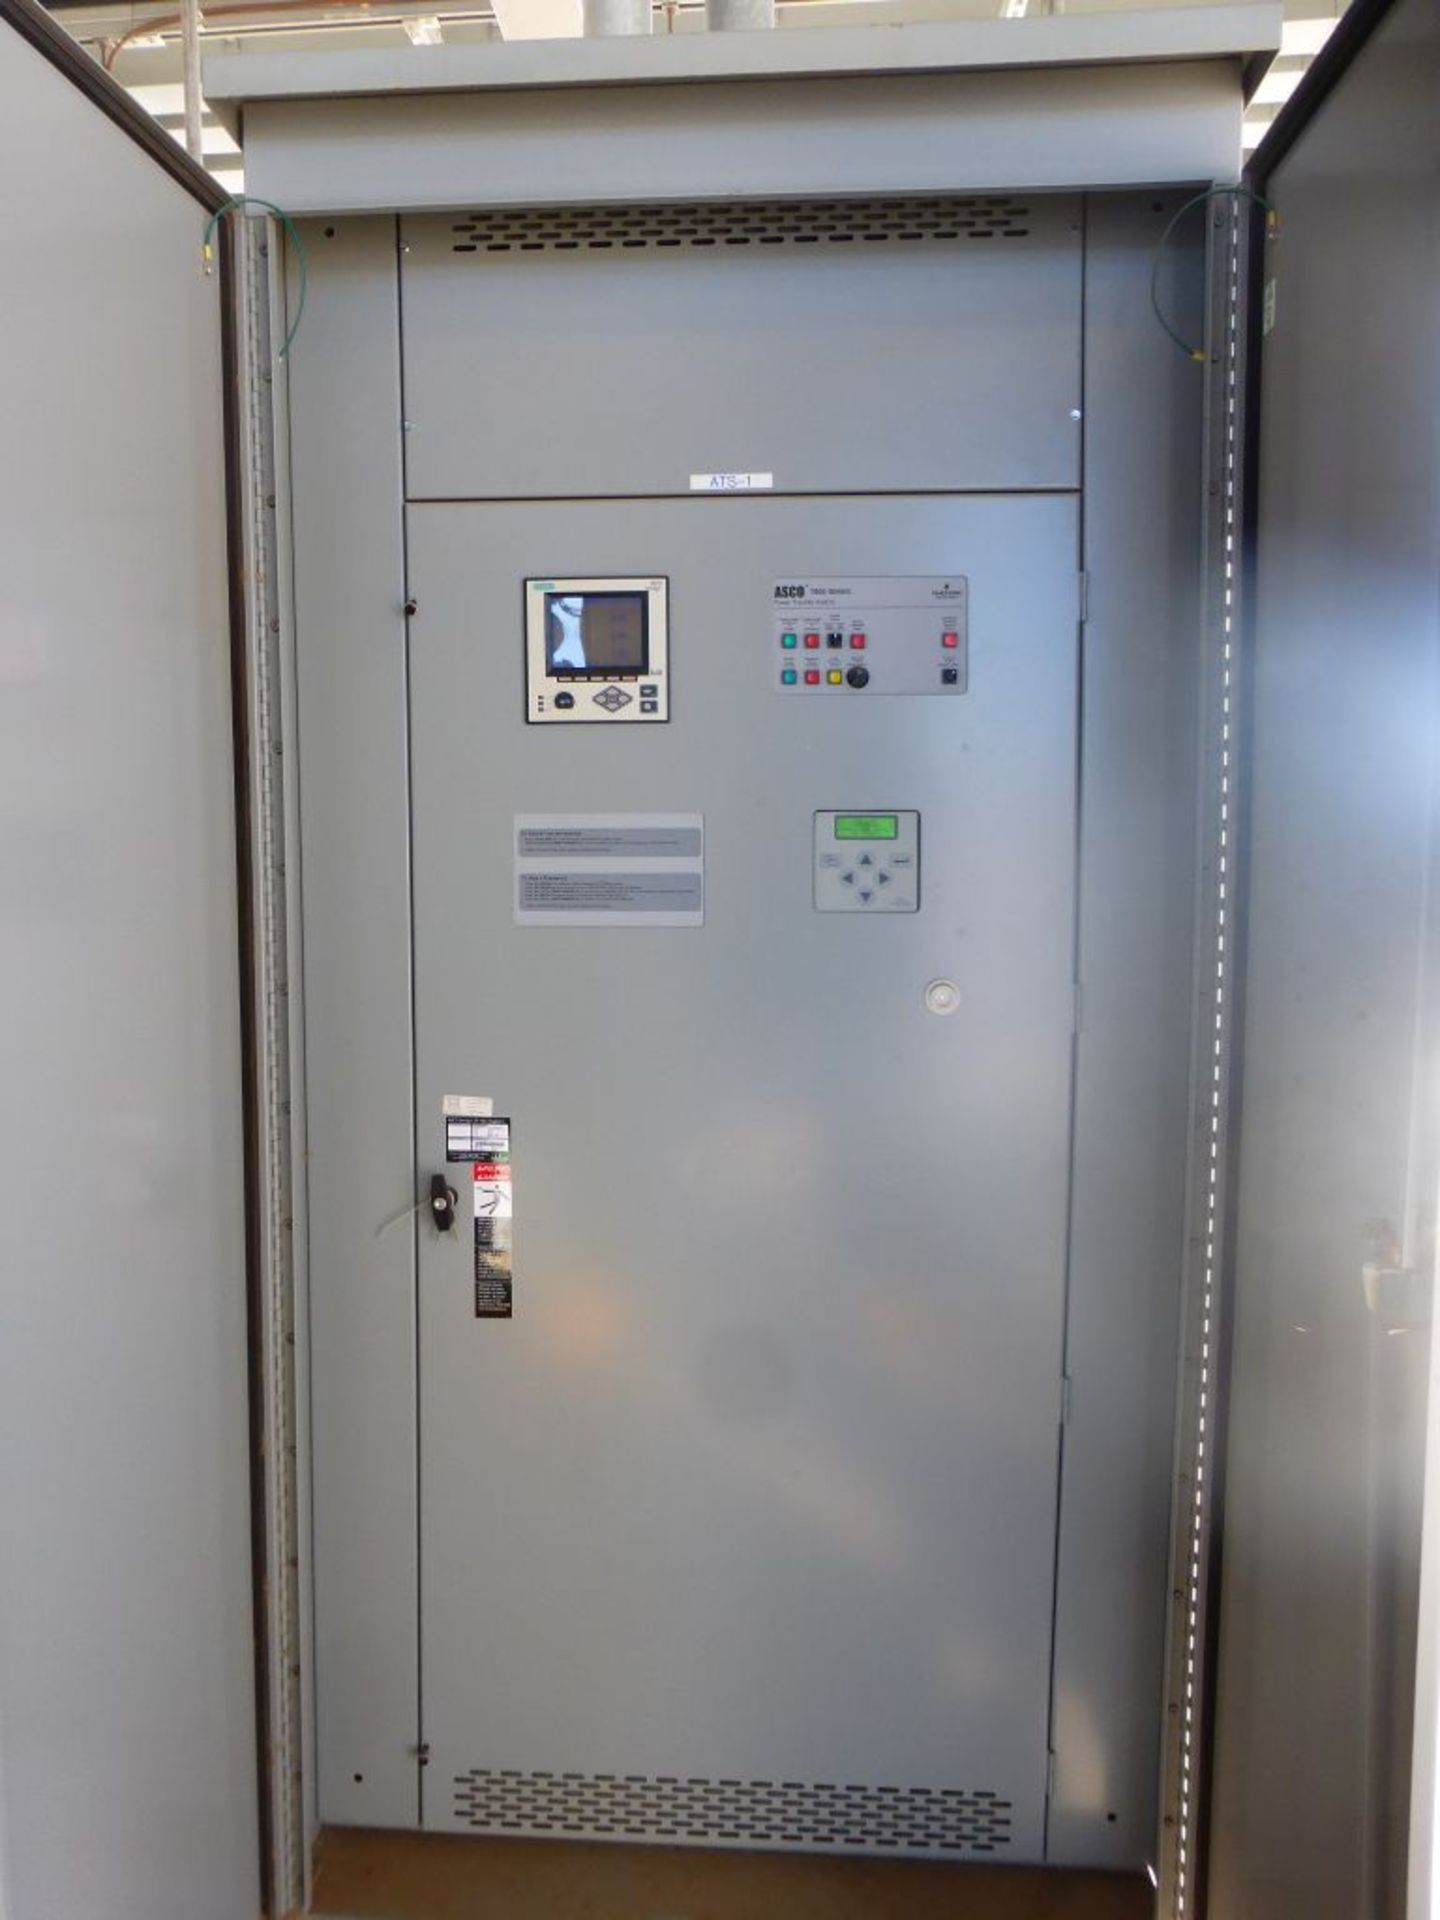 ASCO 7000 Series Power Transfer Switch | Lot Loading Fee: $50 | 800A; 480V; Tag: 233665 - Image 4 of 12